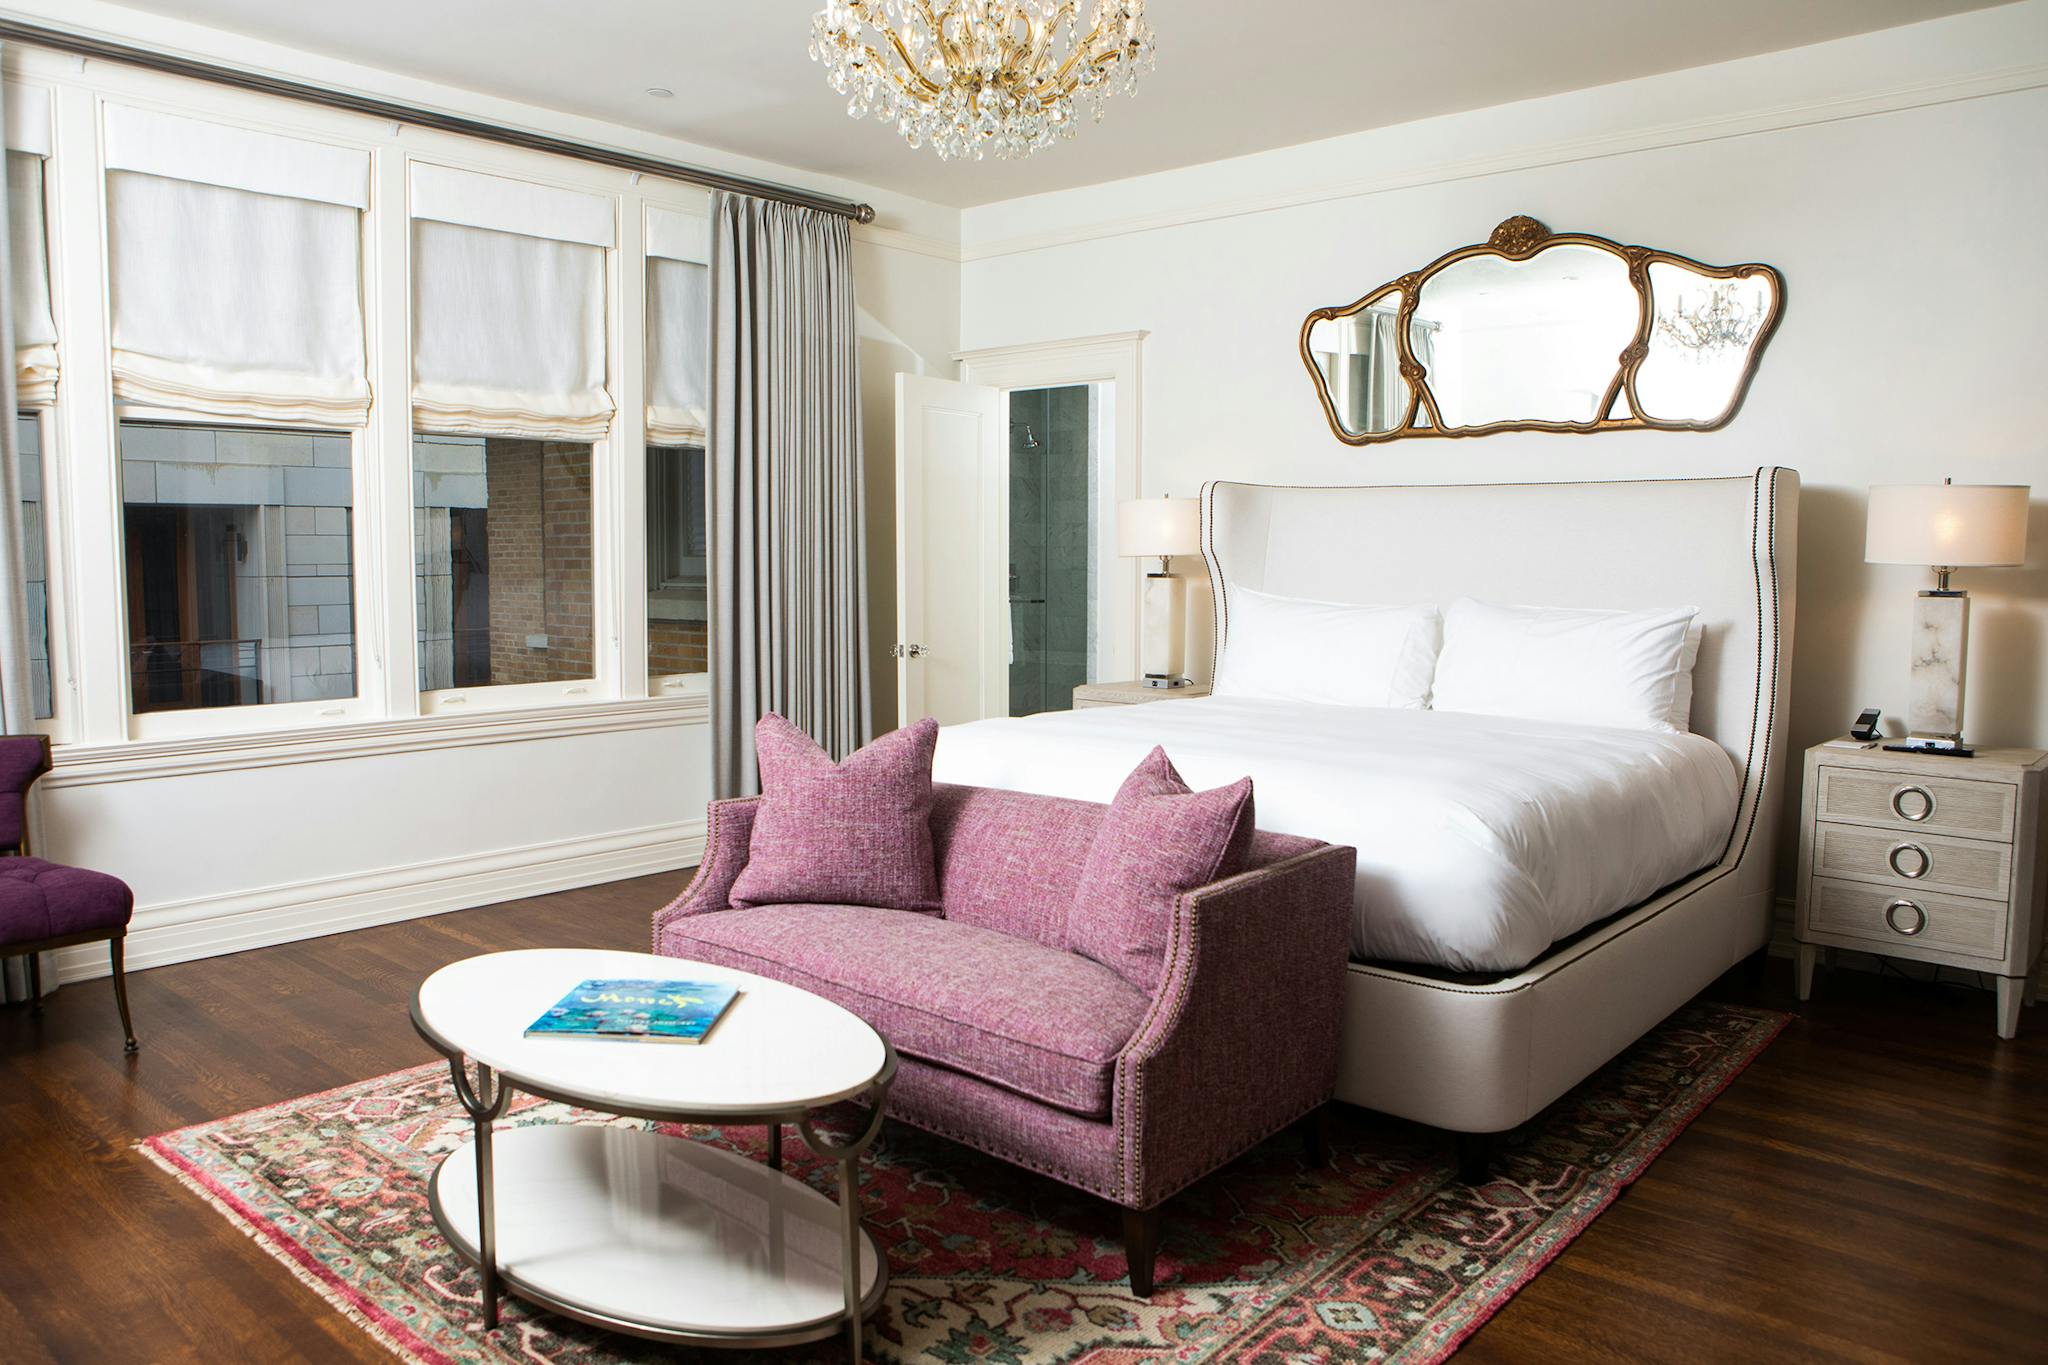 The rooms have been updated with tranquil furnishings accented with playful jewel tones.